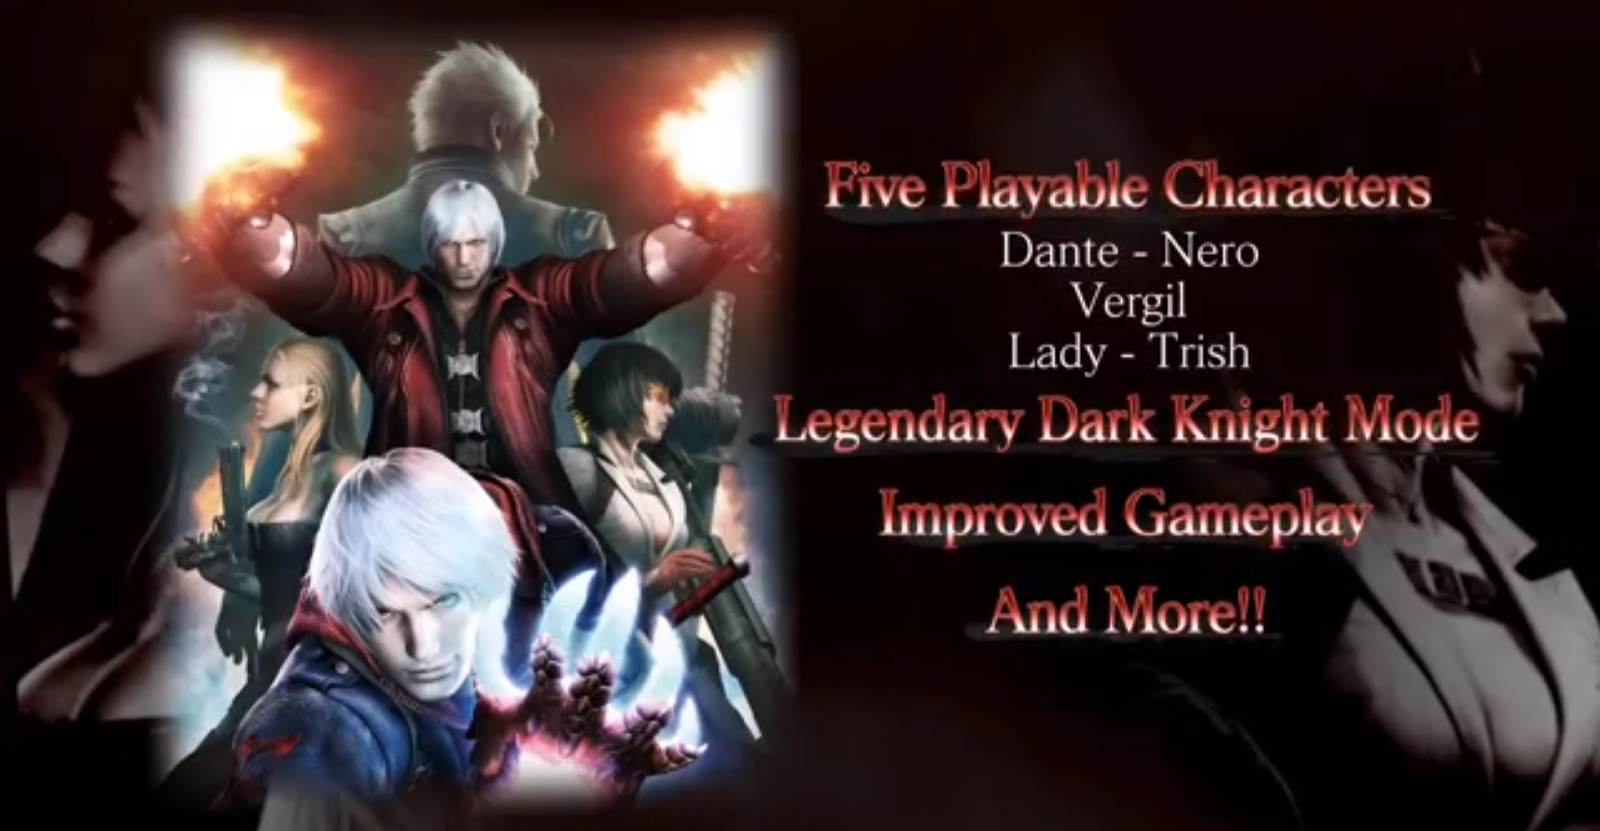 Devil May Cry 4 Special Edition 5 Playable Characters And Pc Version Confirmed Update Retail Release And Limited Edition In Japan Entertainment Ghost